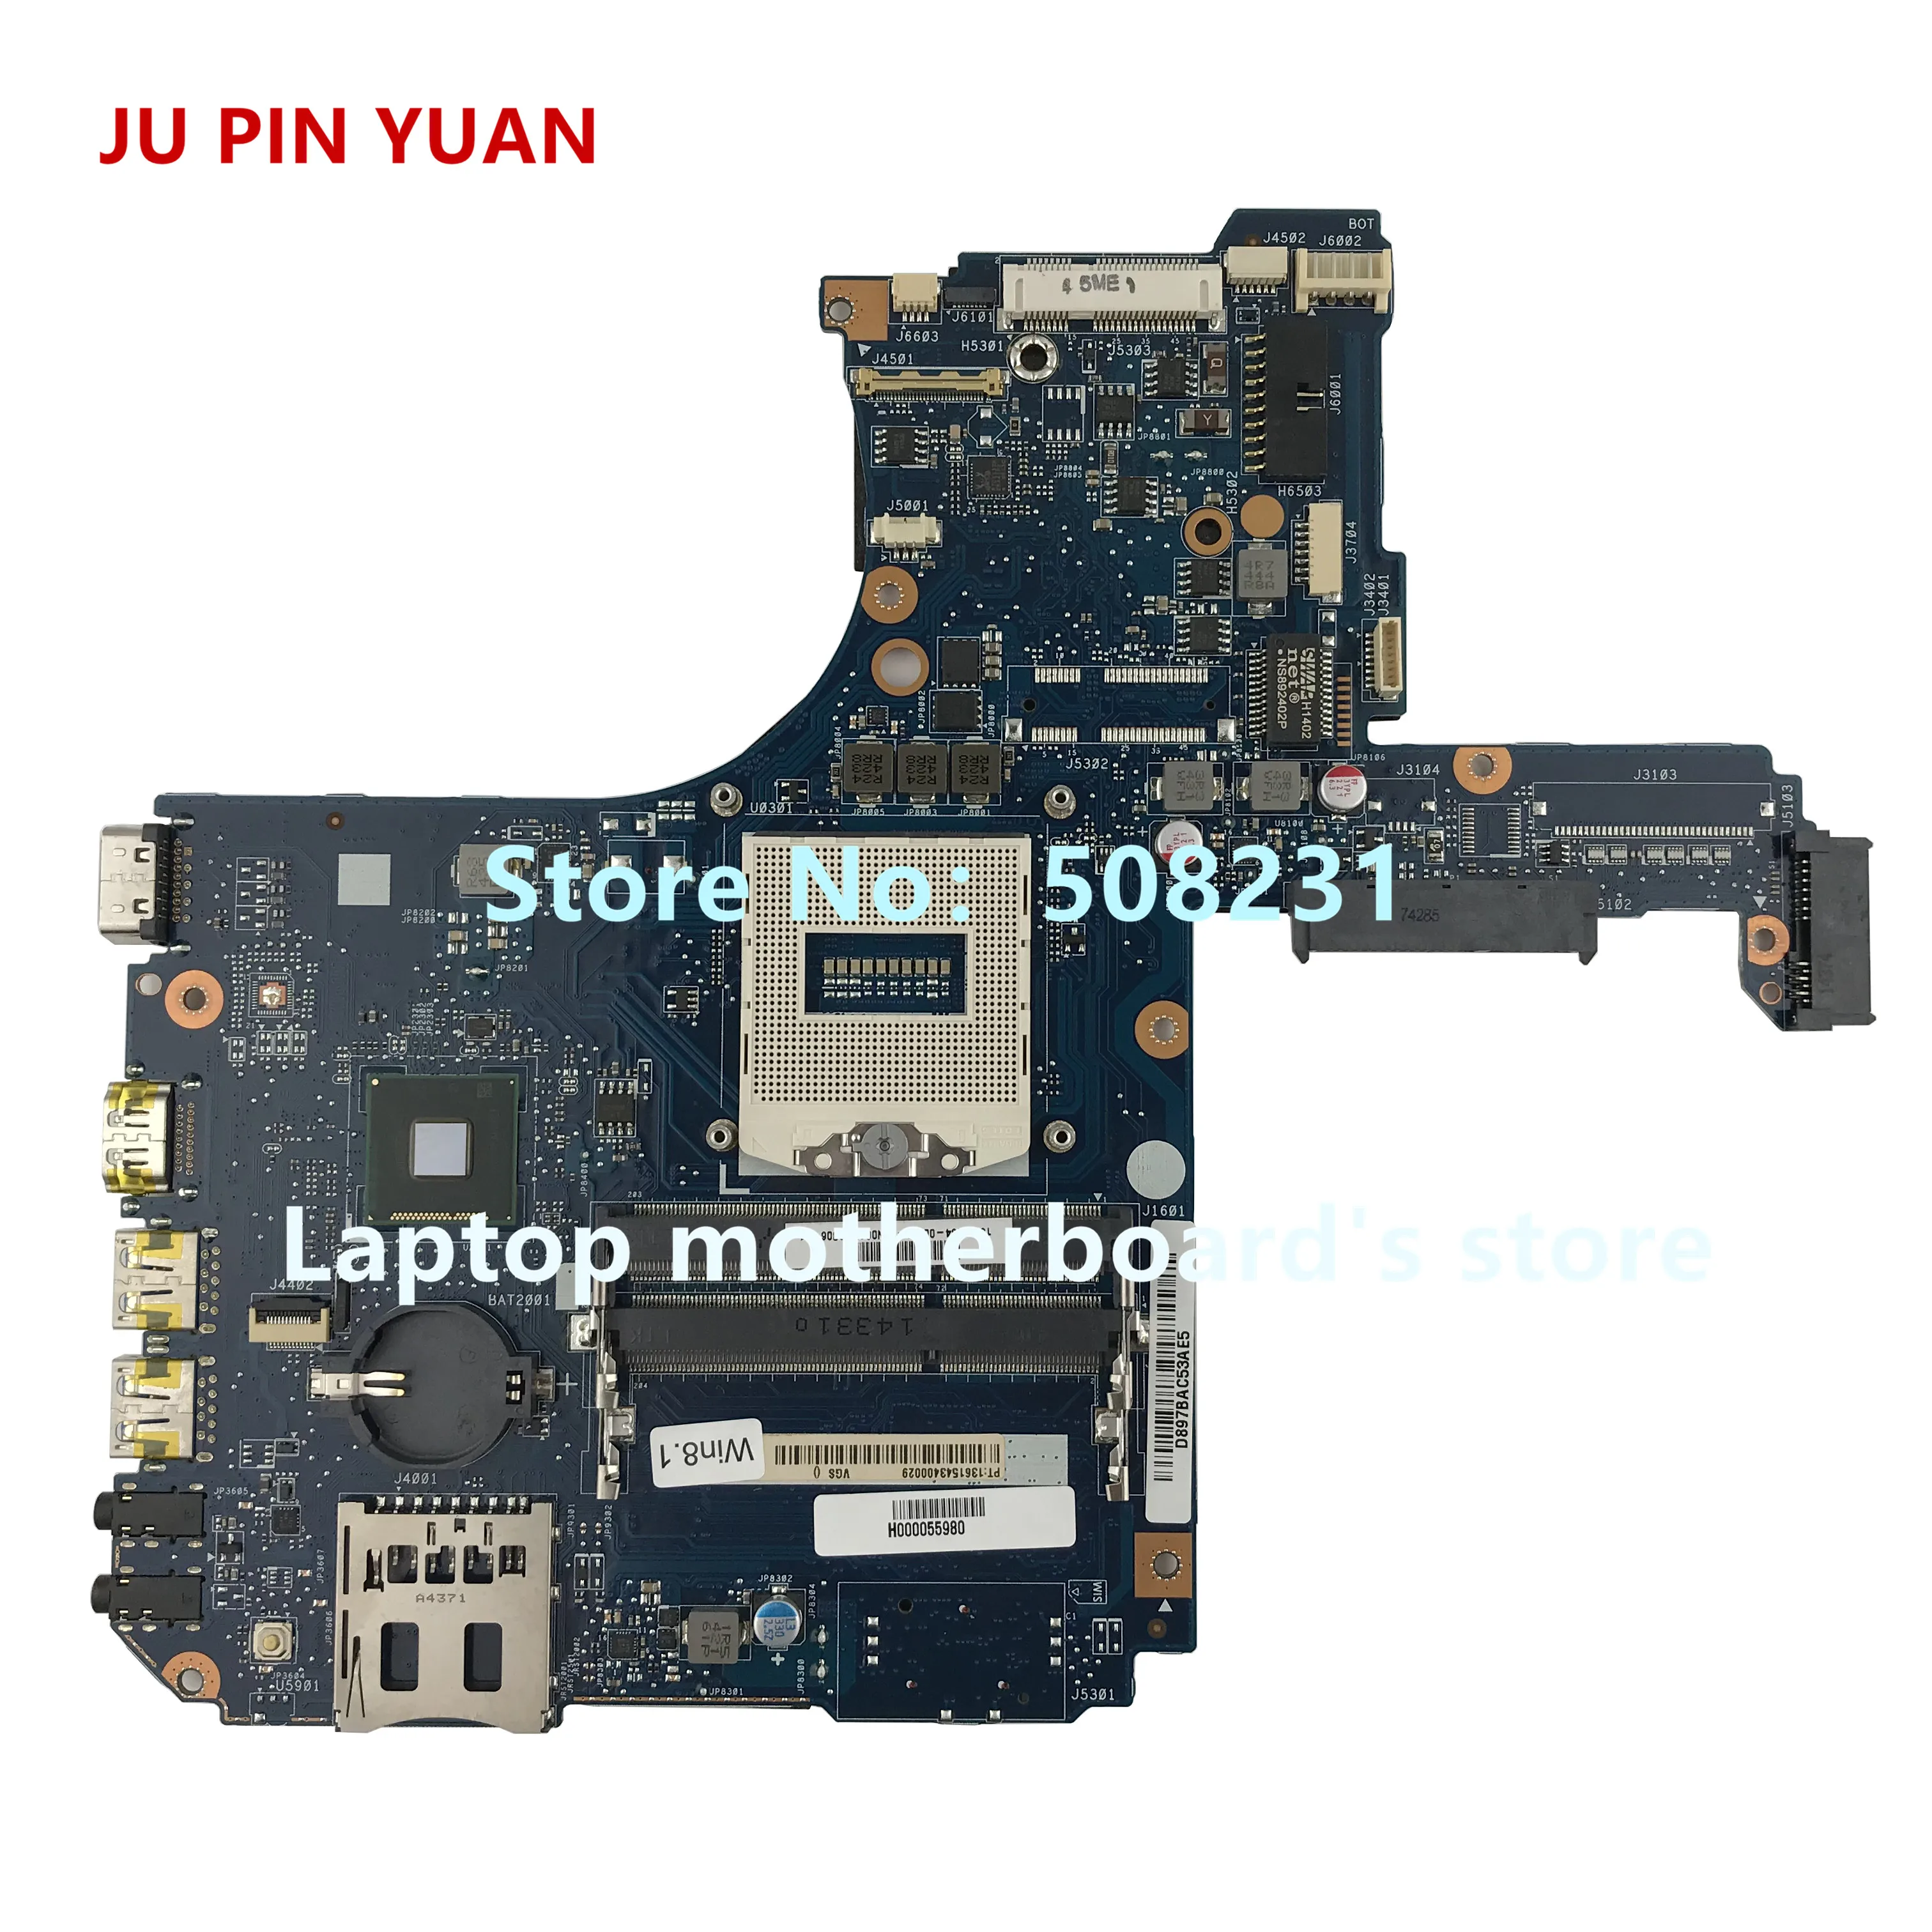 

JU PIN YUAN H000055980 mainboard For Toshiba Satellite S50 S55T S55 S55-A S55-A5188 laptop motherboard socket PGA 947 HM86